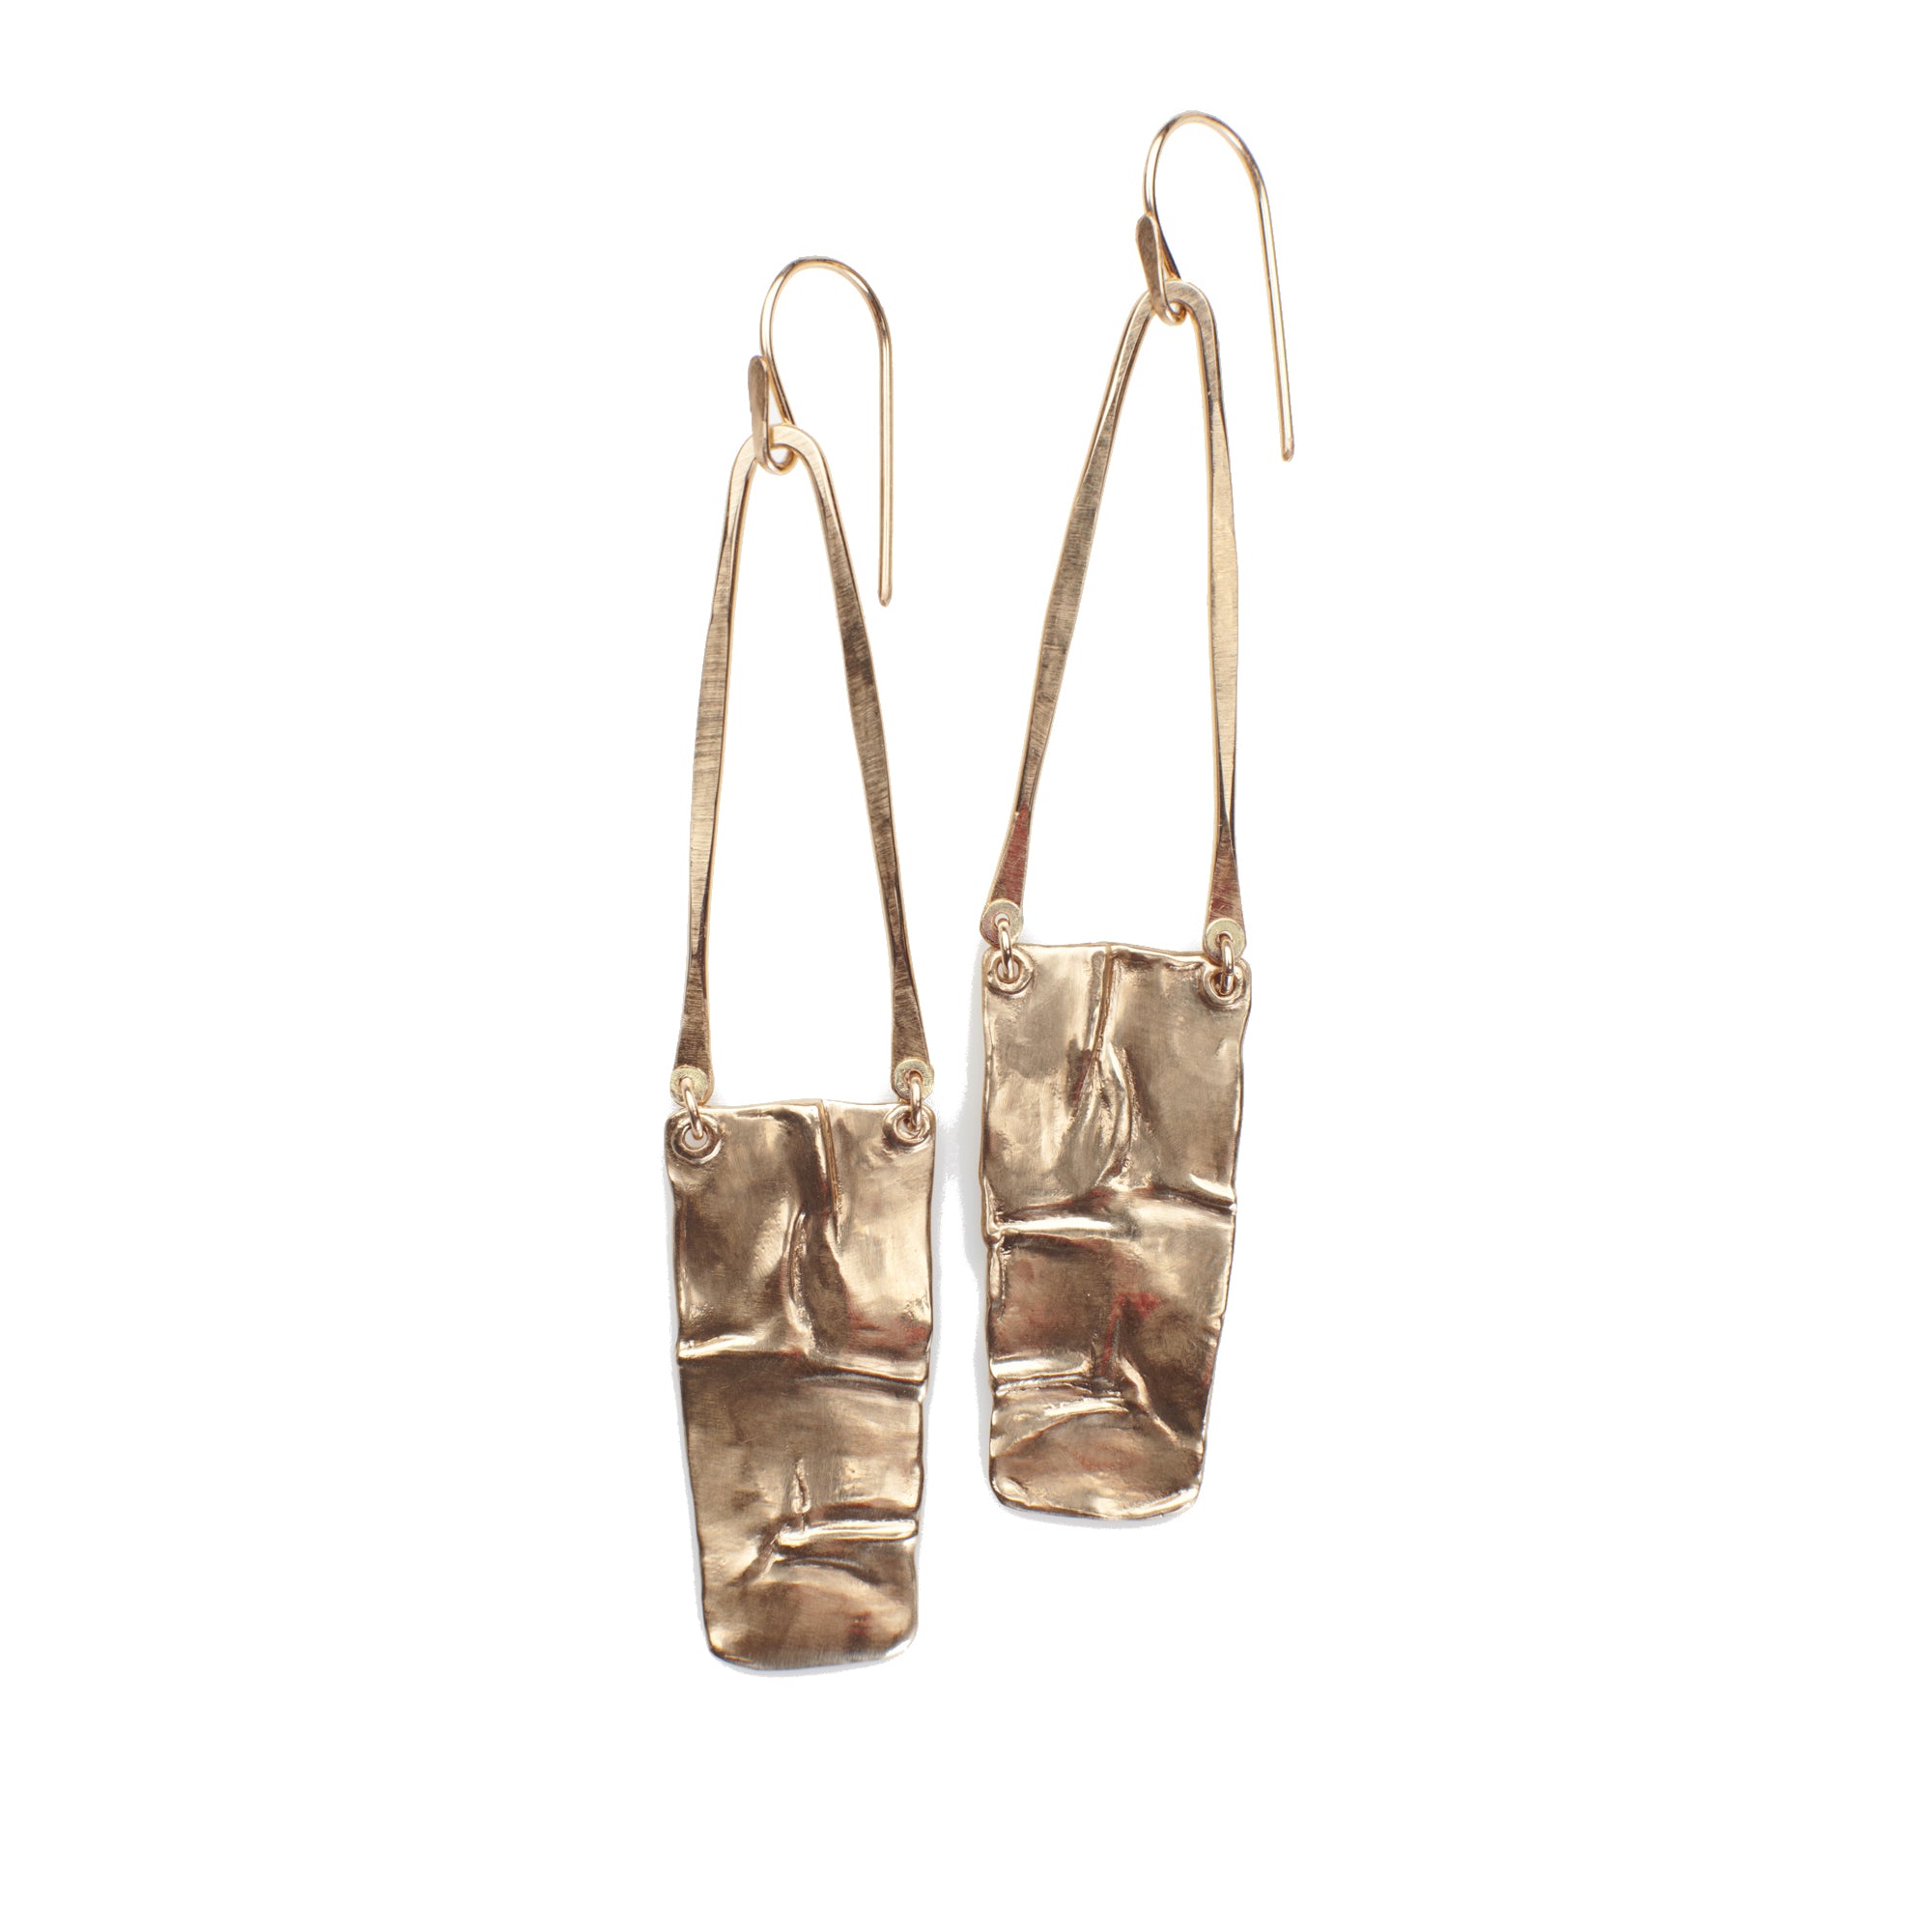 The Shoal Earrings definitely make a statement with an organic pendant suspended on forged 14k gold wire.